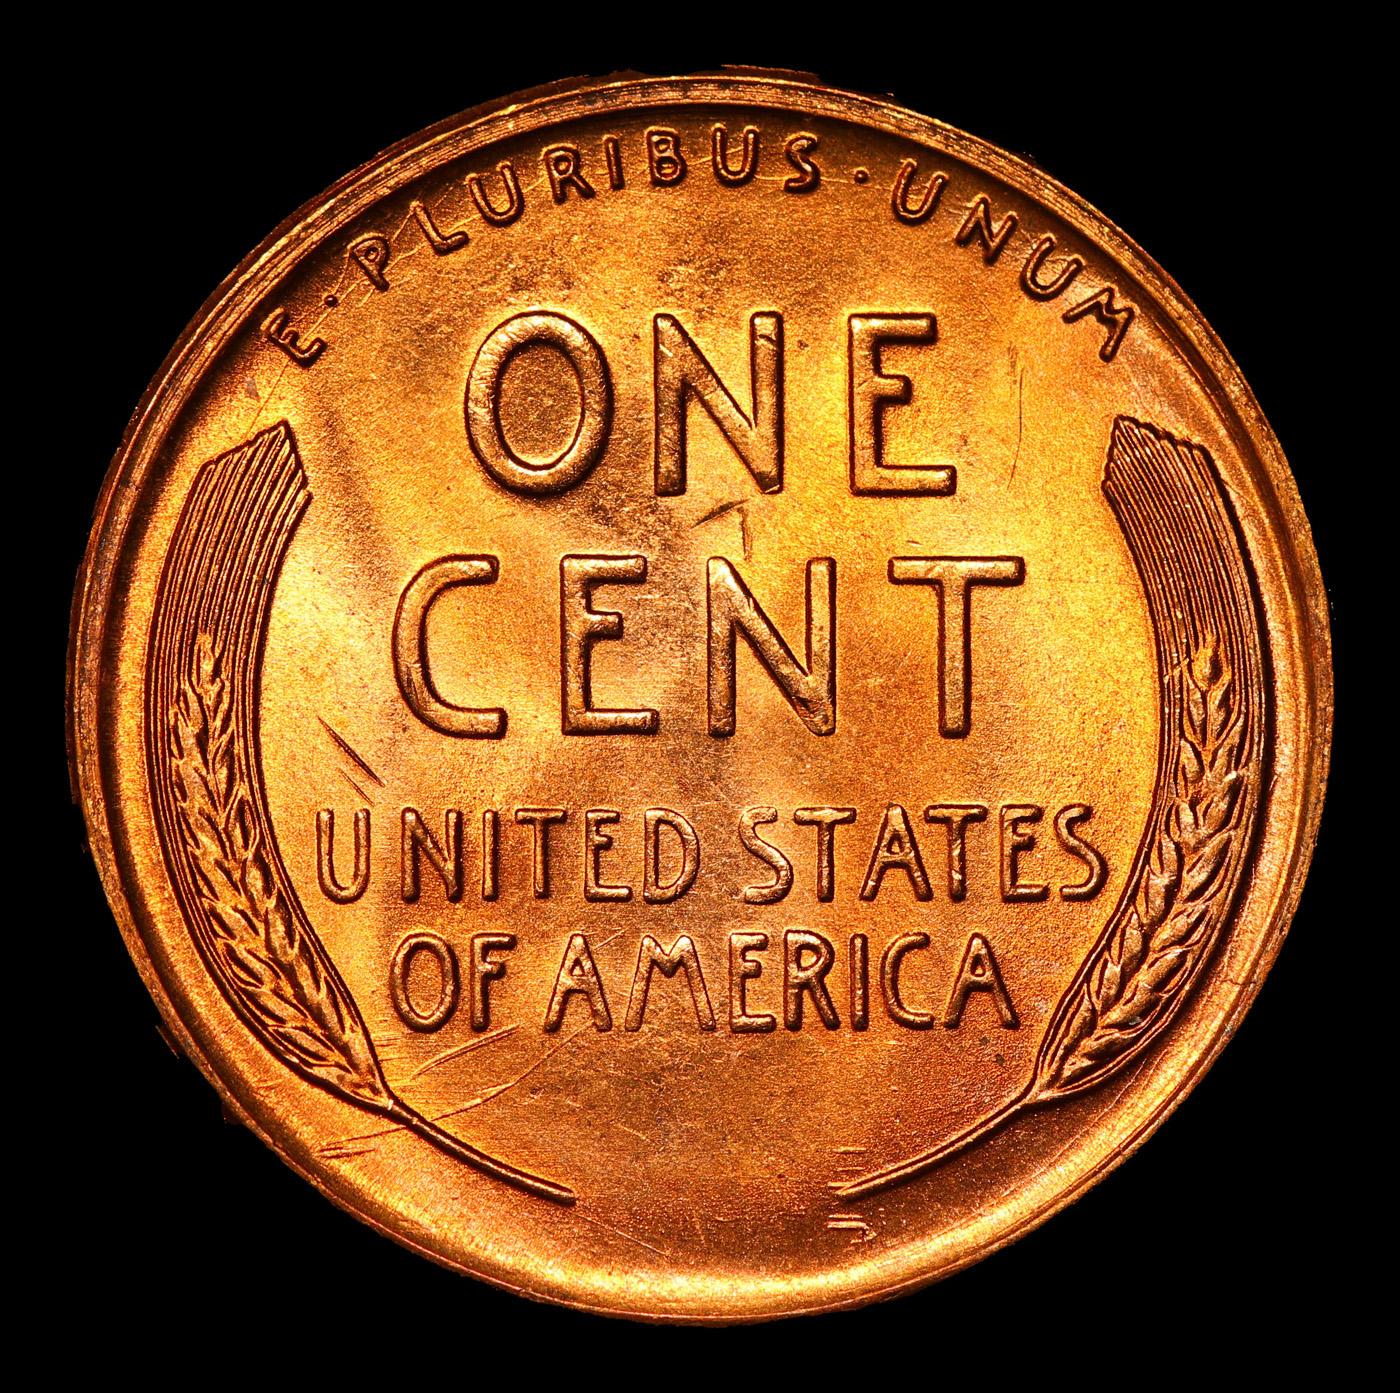 ***Auction Highlight*** 1954-s Lincoln Cent Near Top Pop! 1c Graded GEM++ RD By USCG